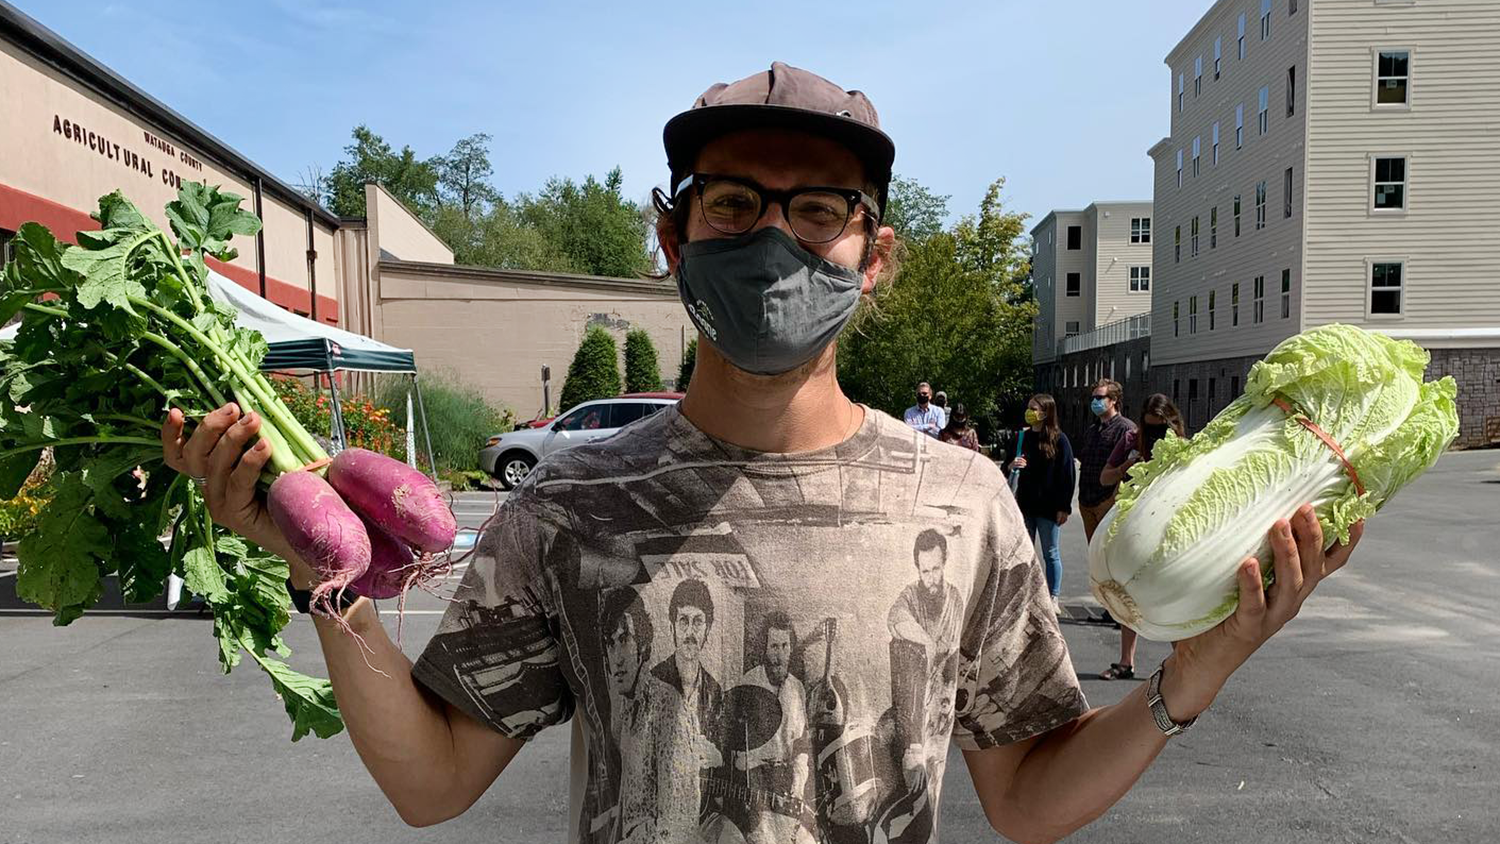 A man wearing a mask and holding up fresh produce